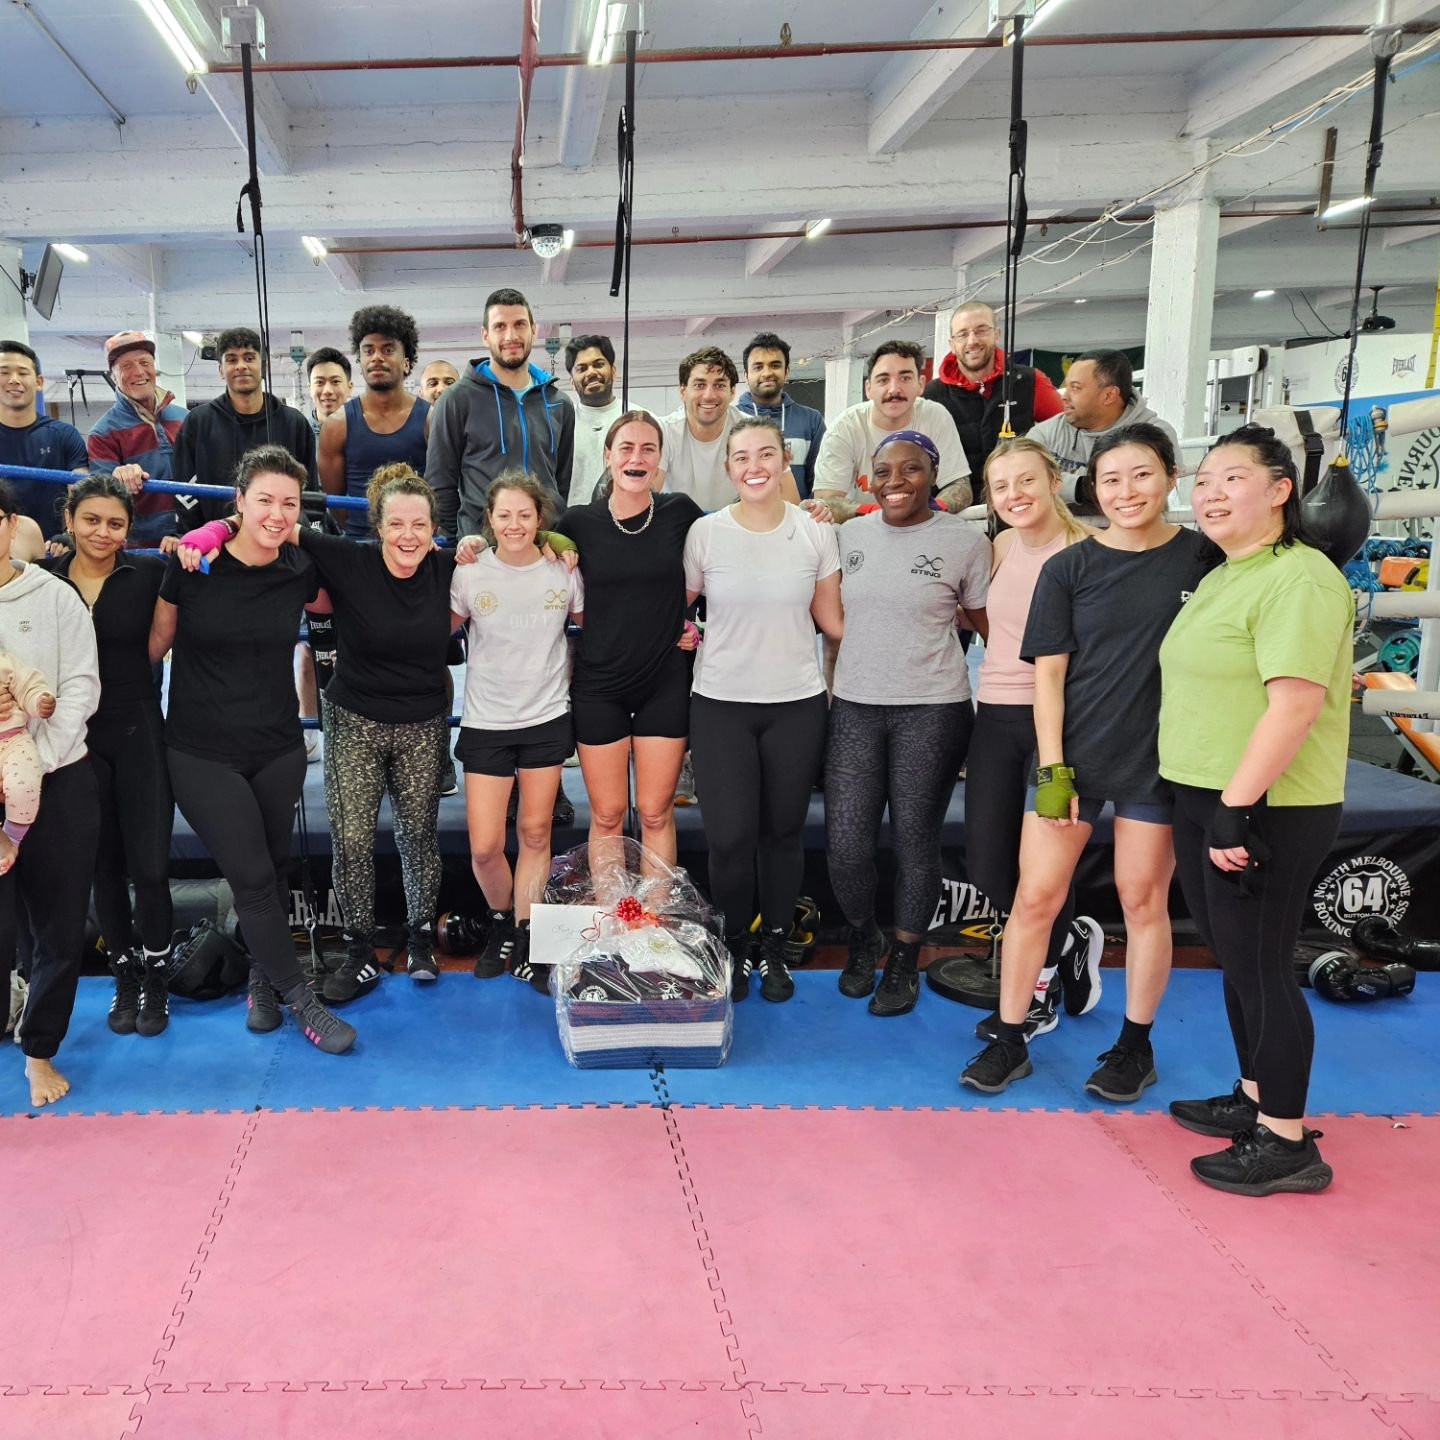 @geezzuuss, it's not good bye, but see ya later!

Three years training @northmelbourneboxing
A State Title, friendships made, and lots of fun times.

Thank you for your valued support and friendship, and from everyone at North Melbourne Boxing and Fi